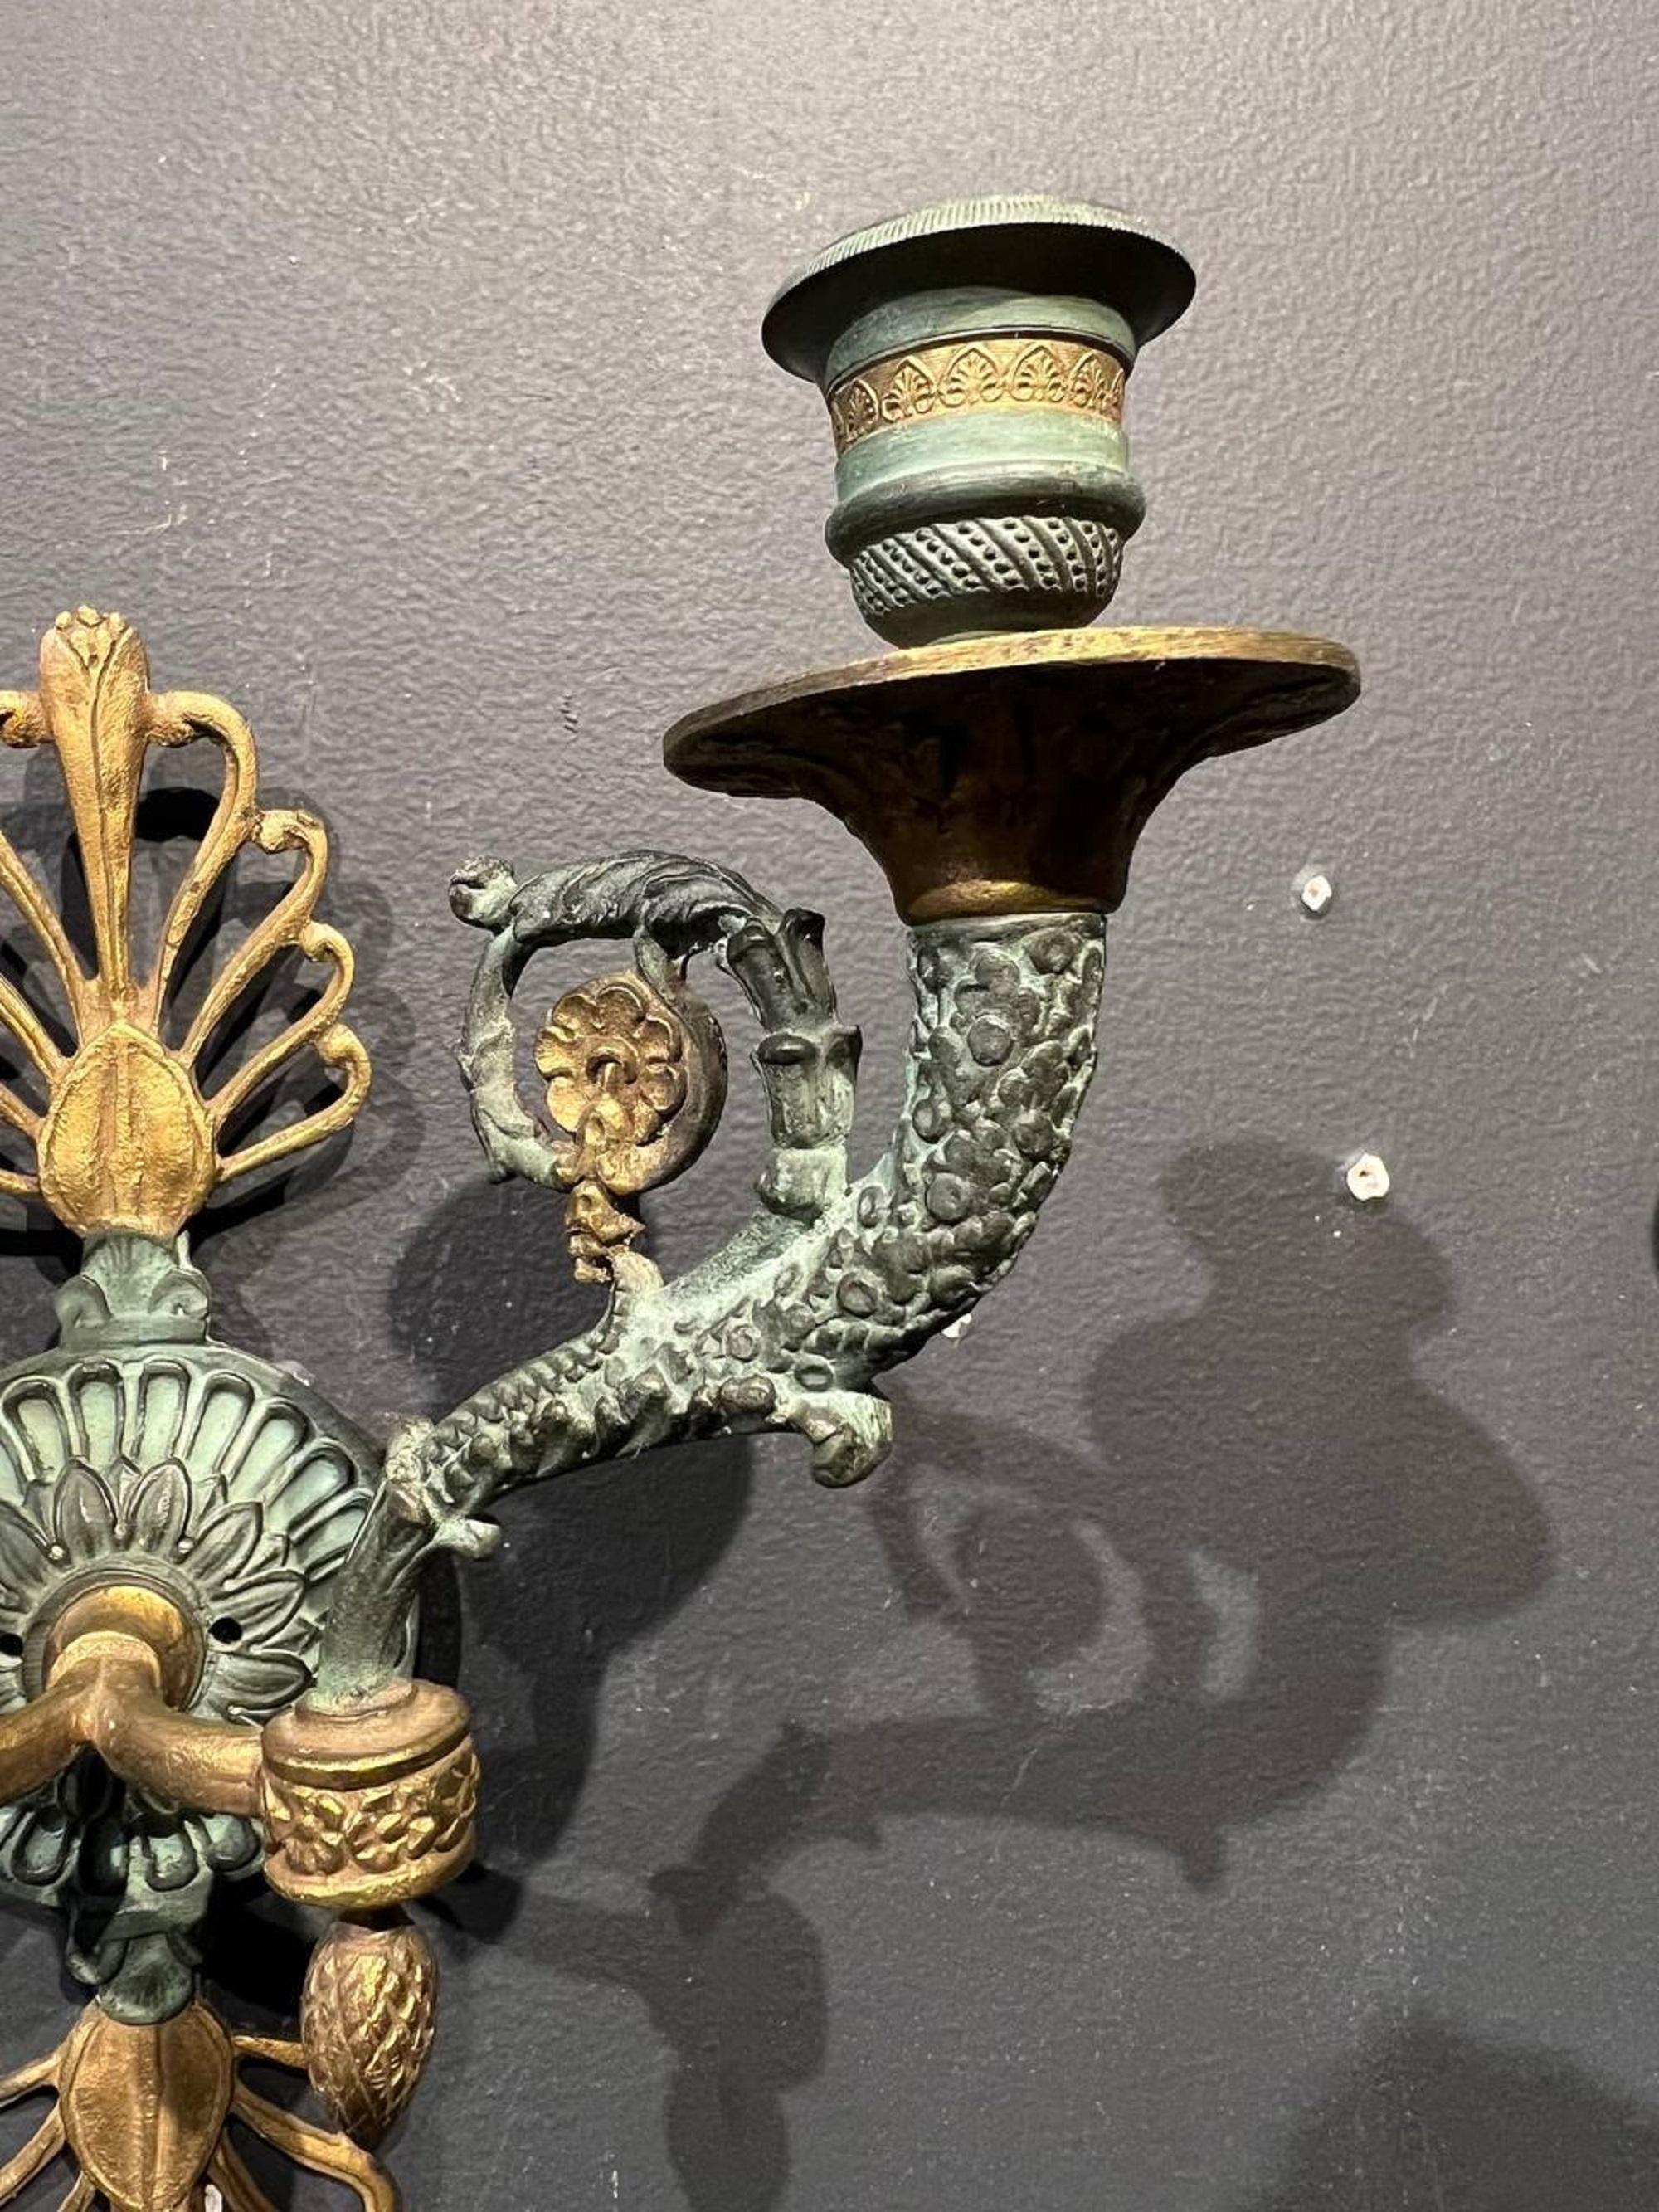 Beautiful pair of 19th century empire sconces with green patina finish.

Dealer: G302YP.